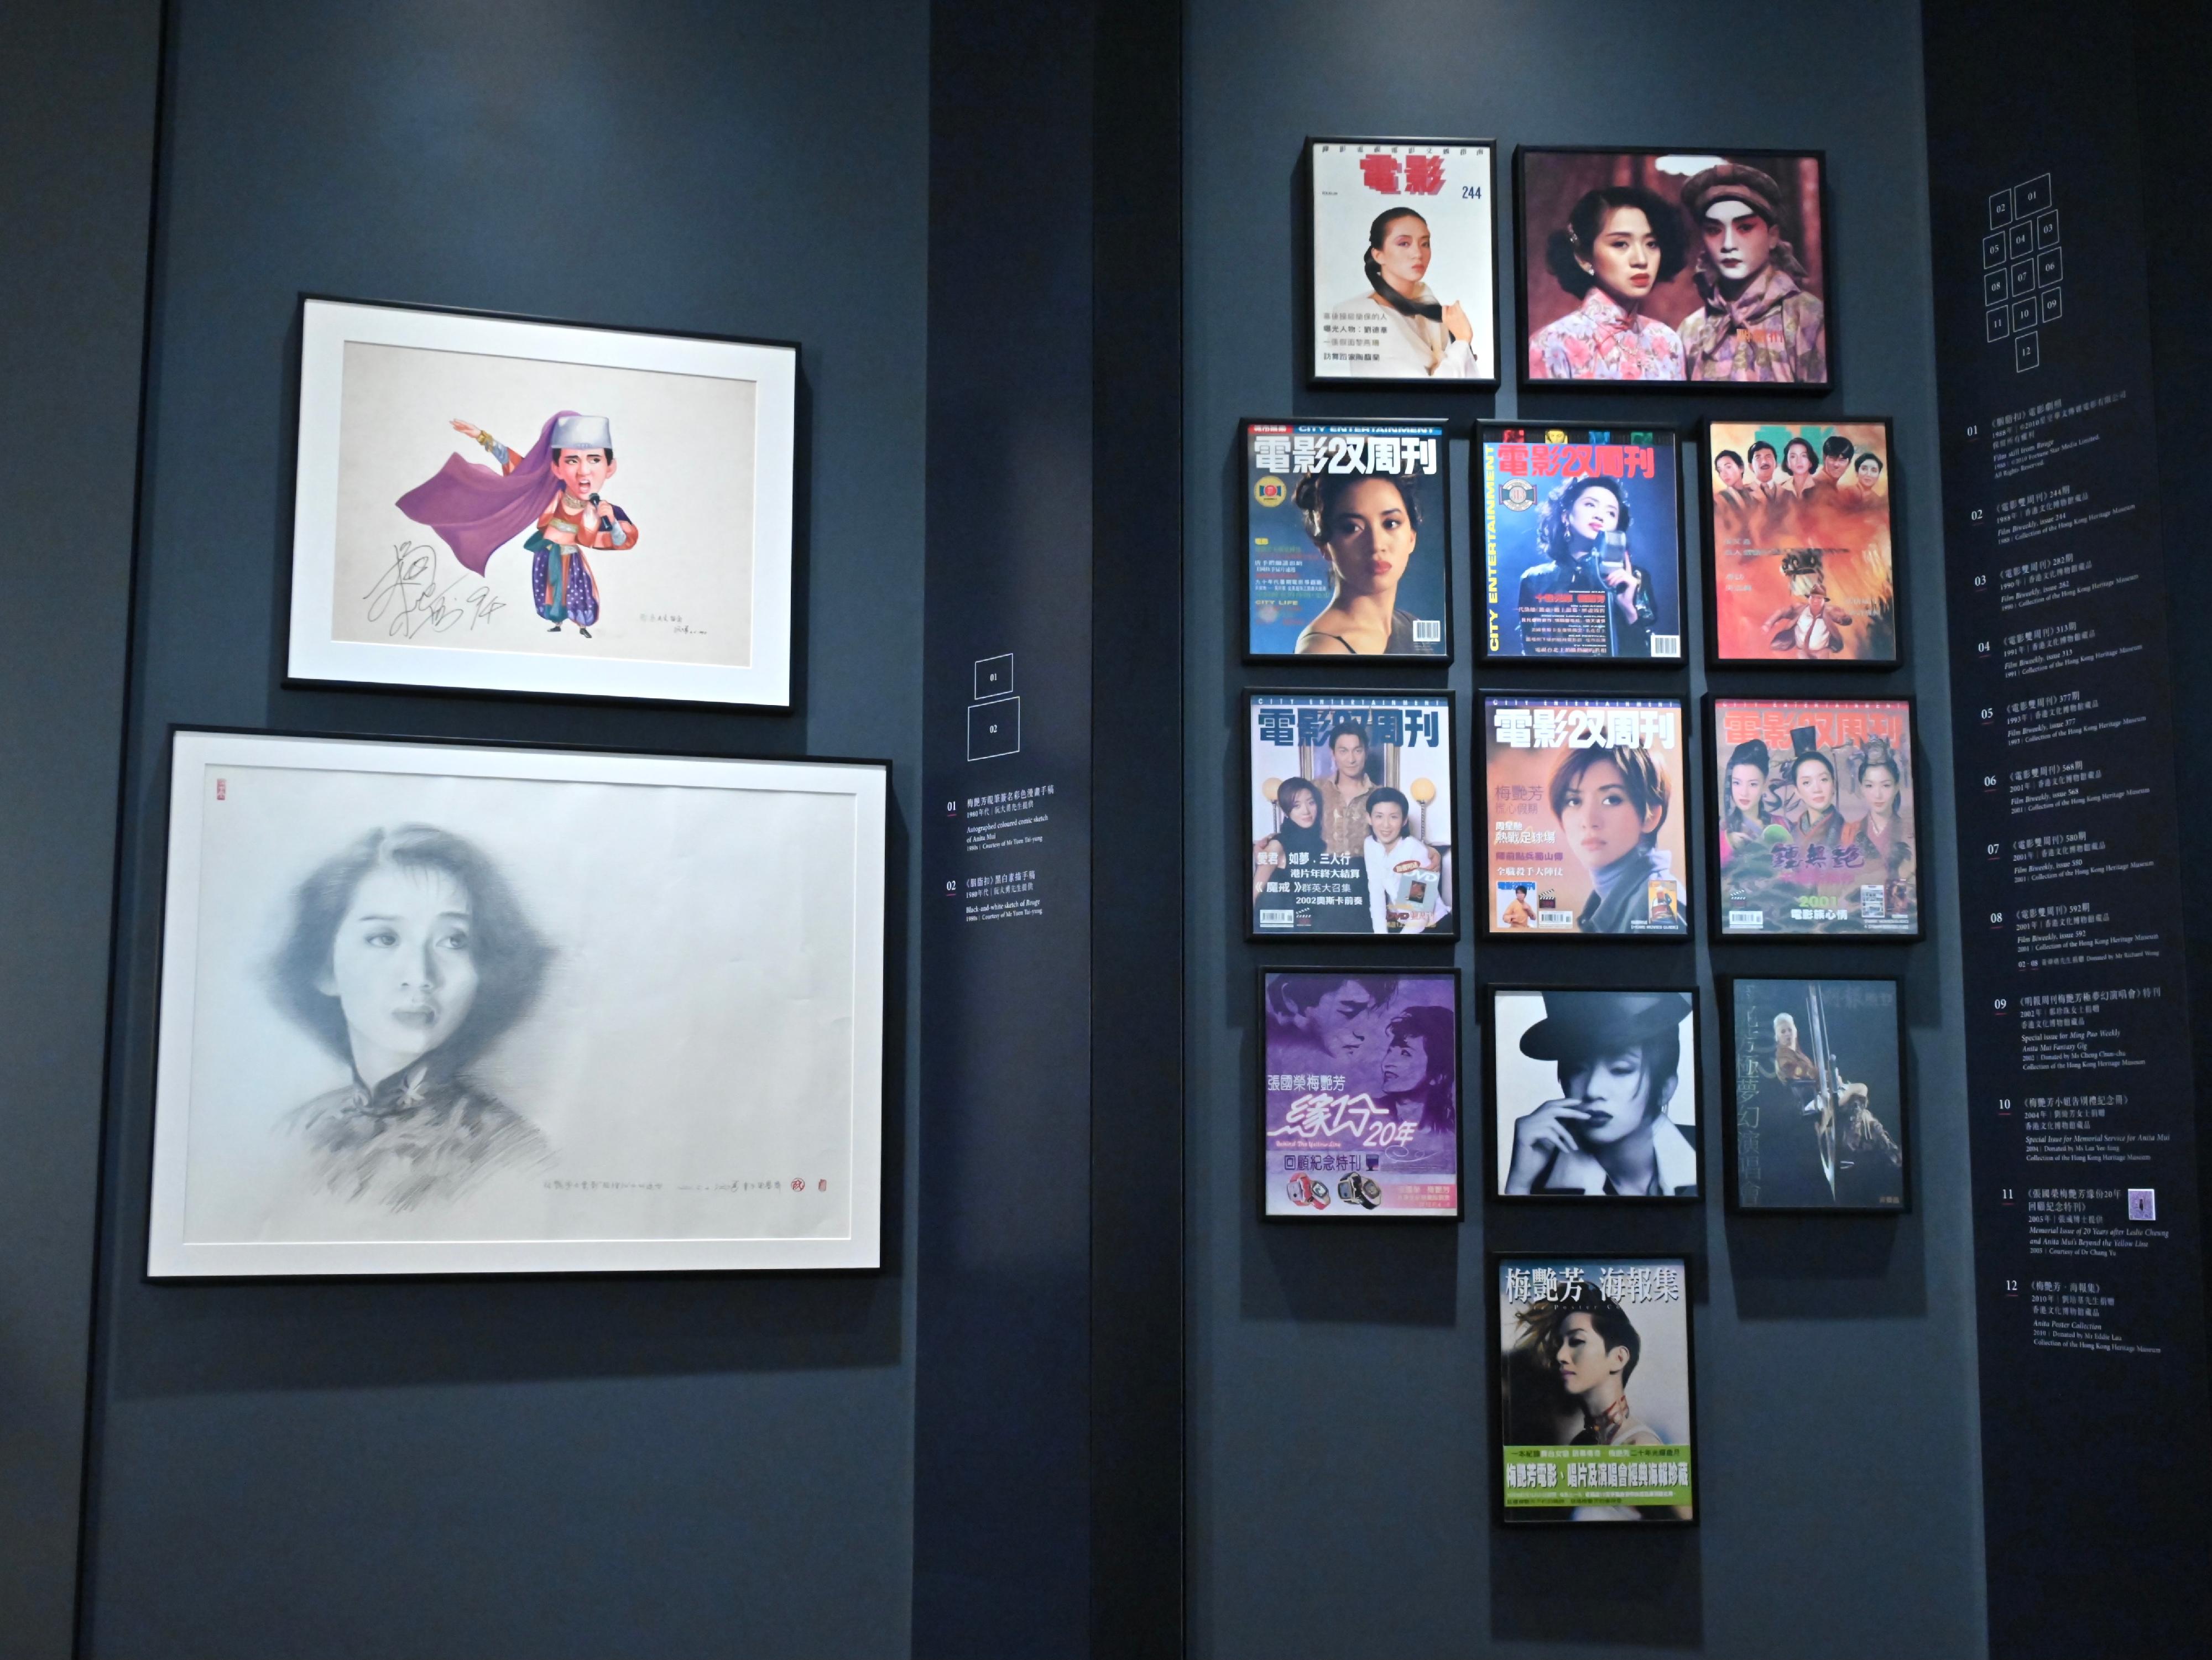 The opening ceremony for the "Timeless Diva: Anita Mui" exhibition was held today (December 23) at the Hong Kong Heritage Museum. Photo shows the pop culture products related to Anita Mui, including a cartoon, magazine covers and a black-and-white sketch.